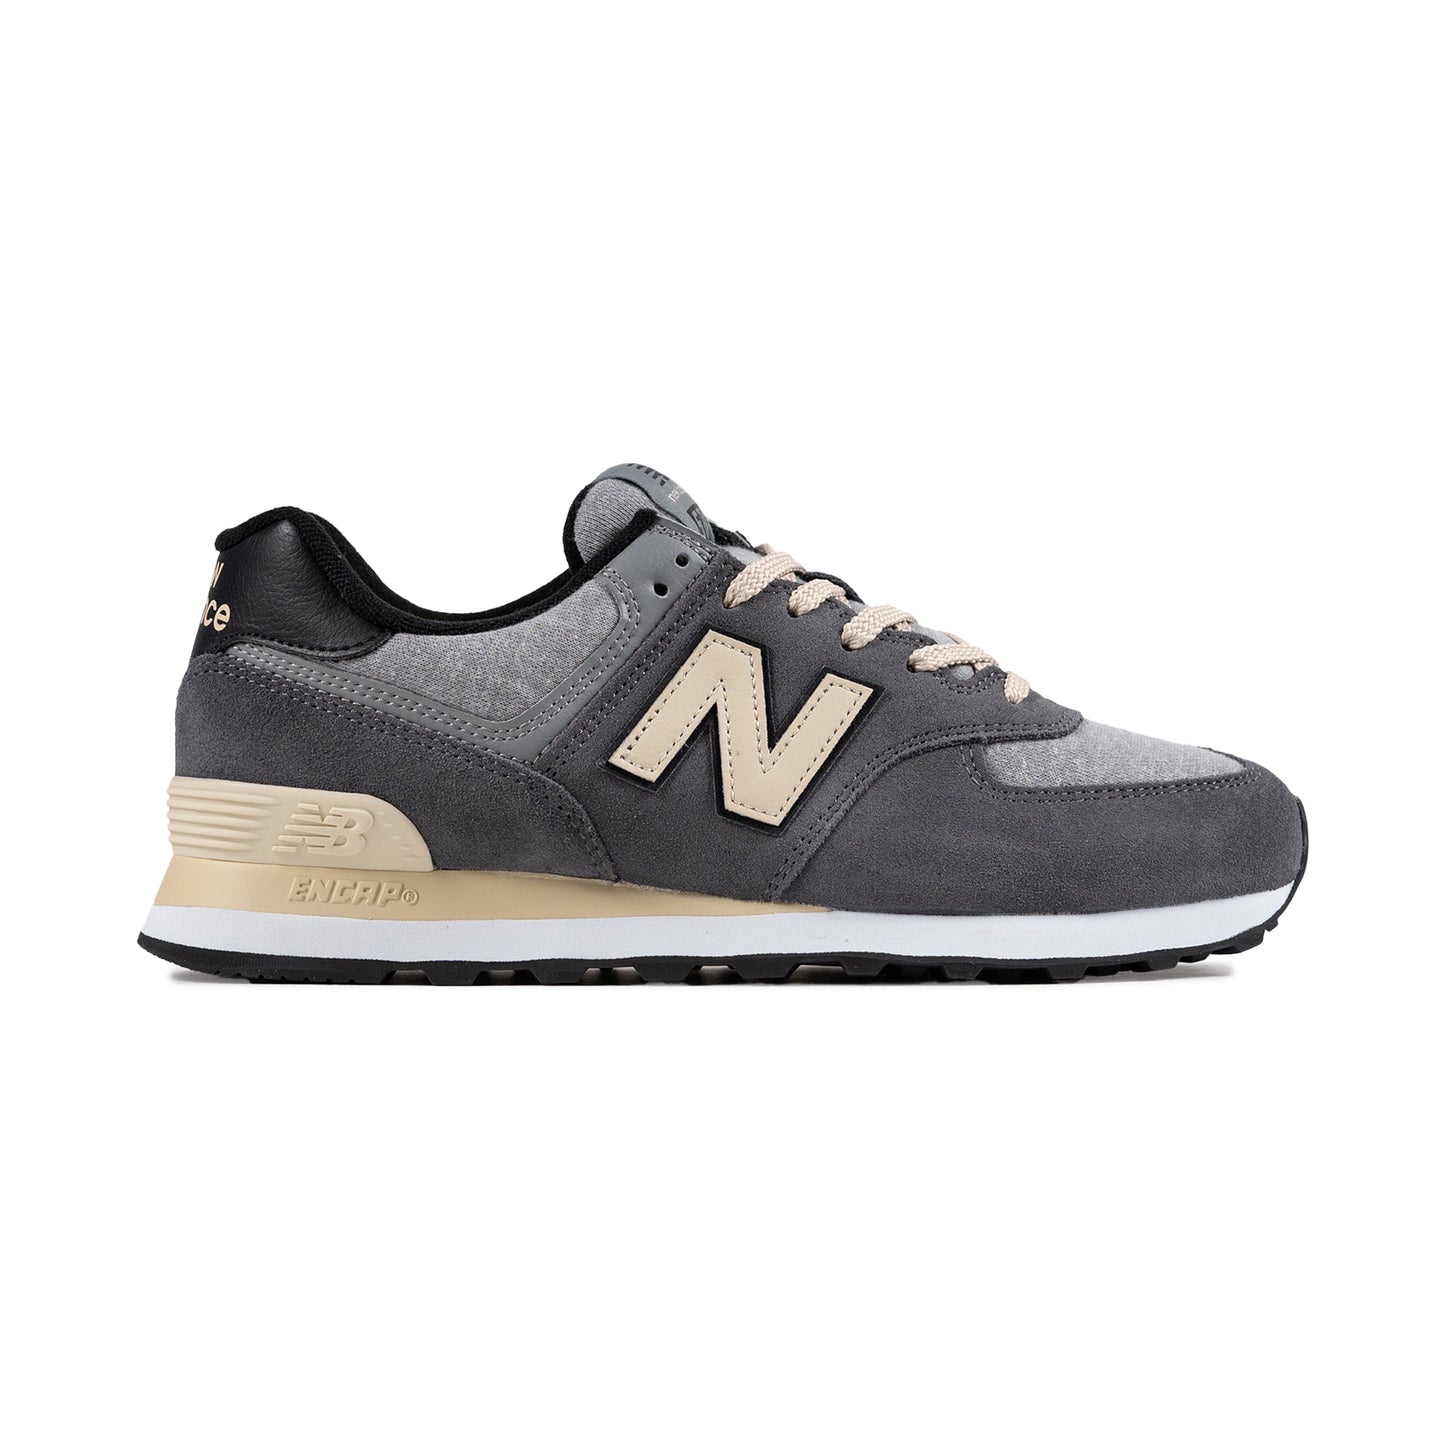 New Balance 574 Magnet Grey Sneakers